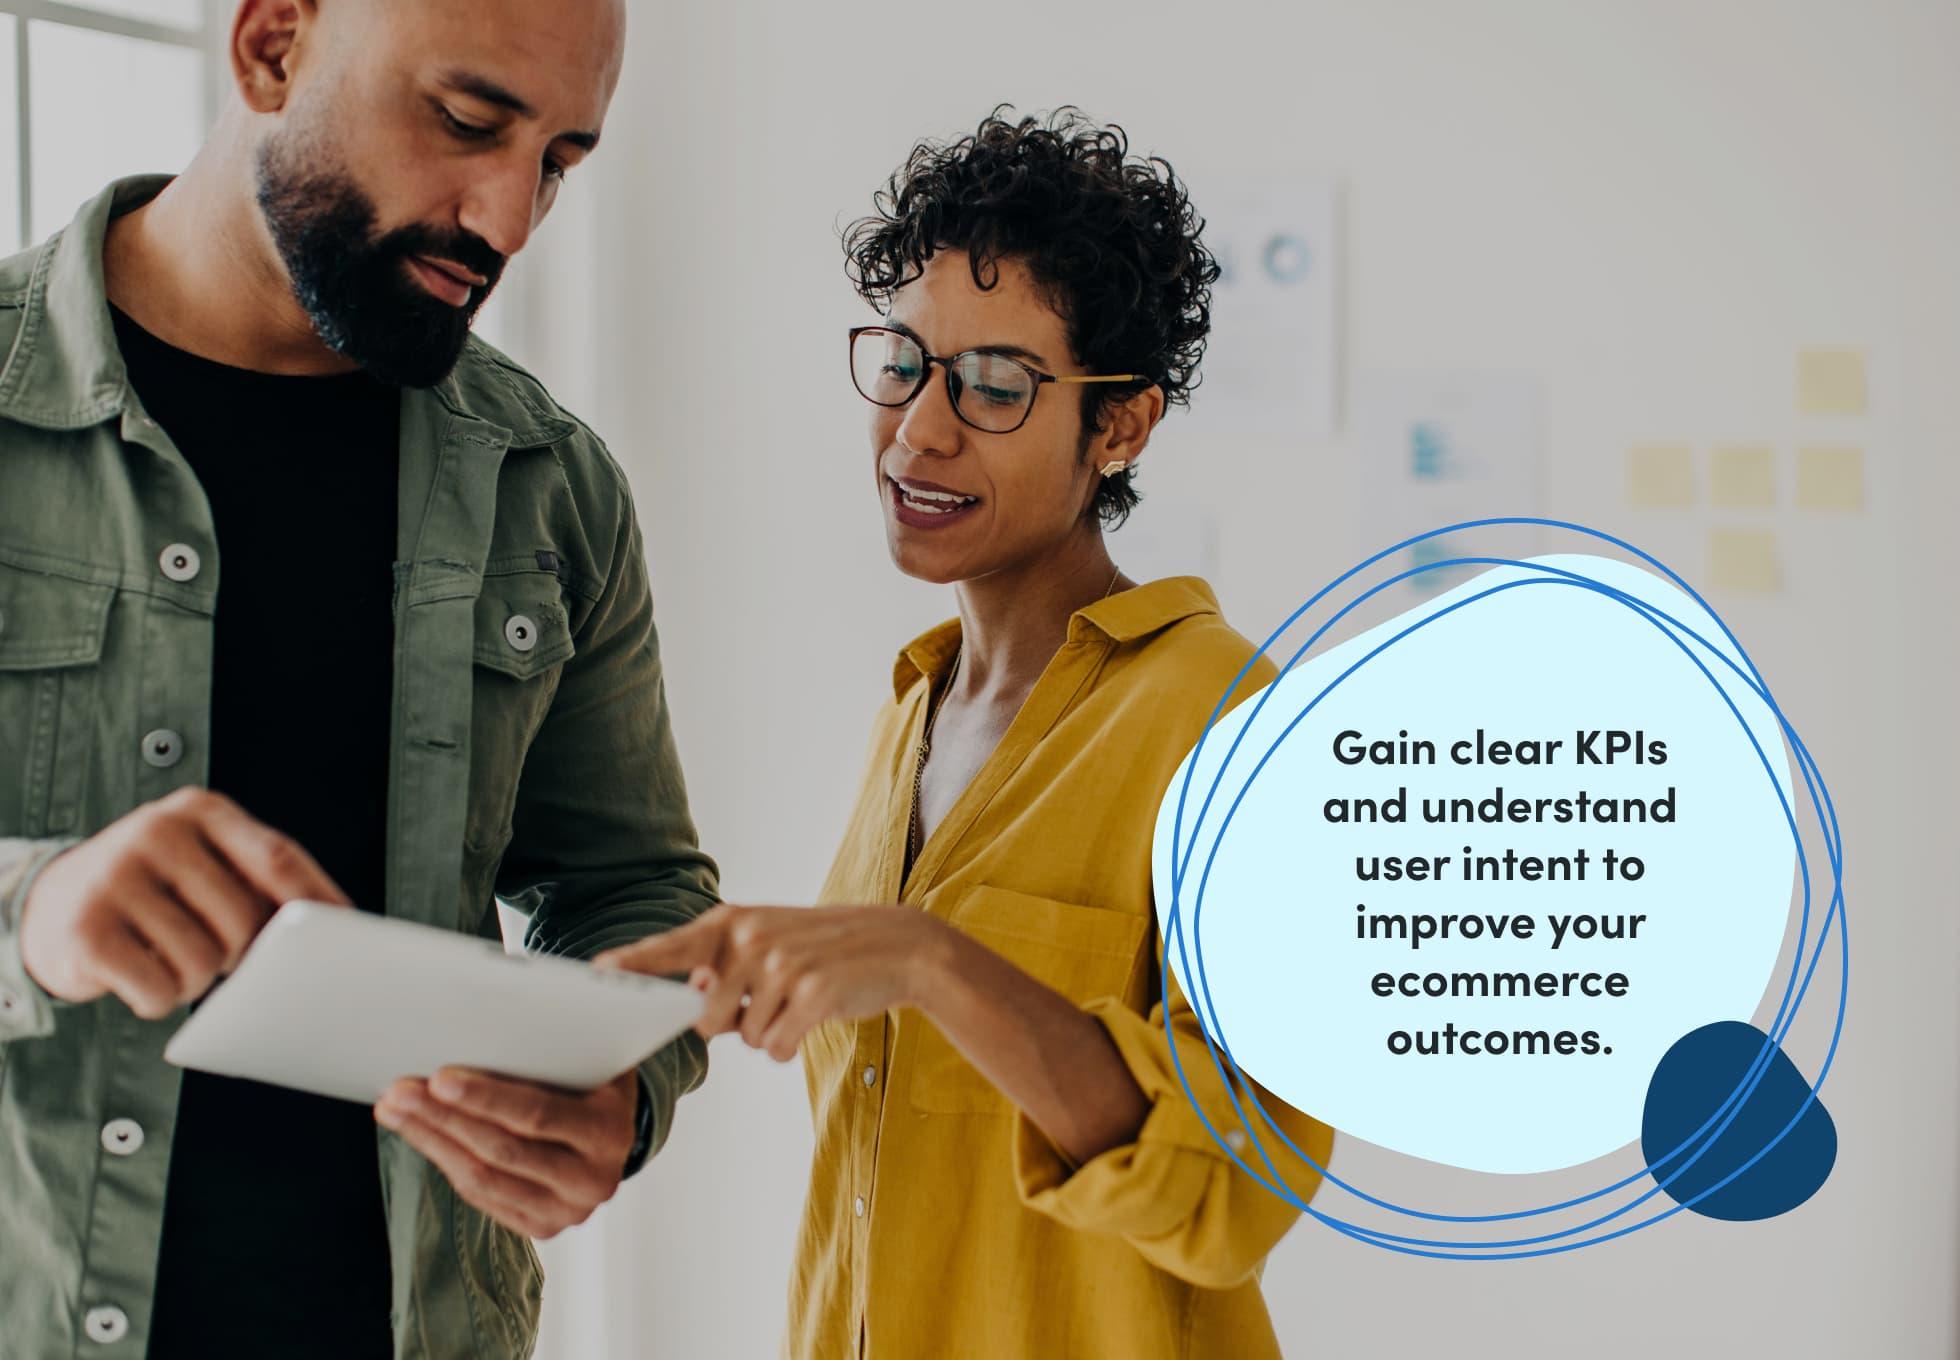 Two people looking at an Ipad or tablet. A sentence imposed on top of the image says, "Gain clear KPIs and understand user intent to improve your ecommerce outcomes."